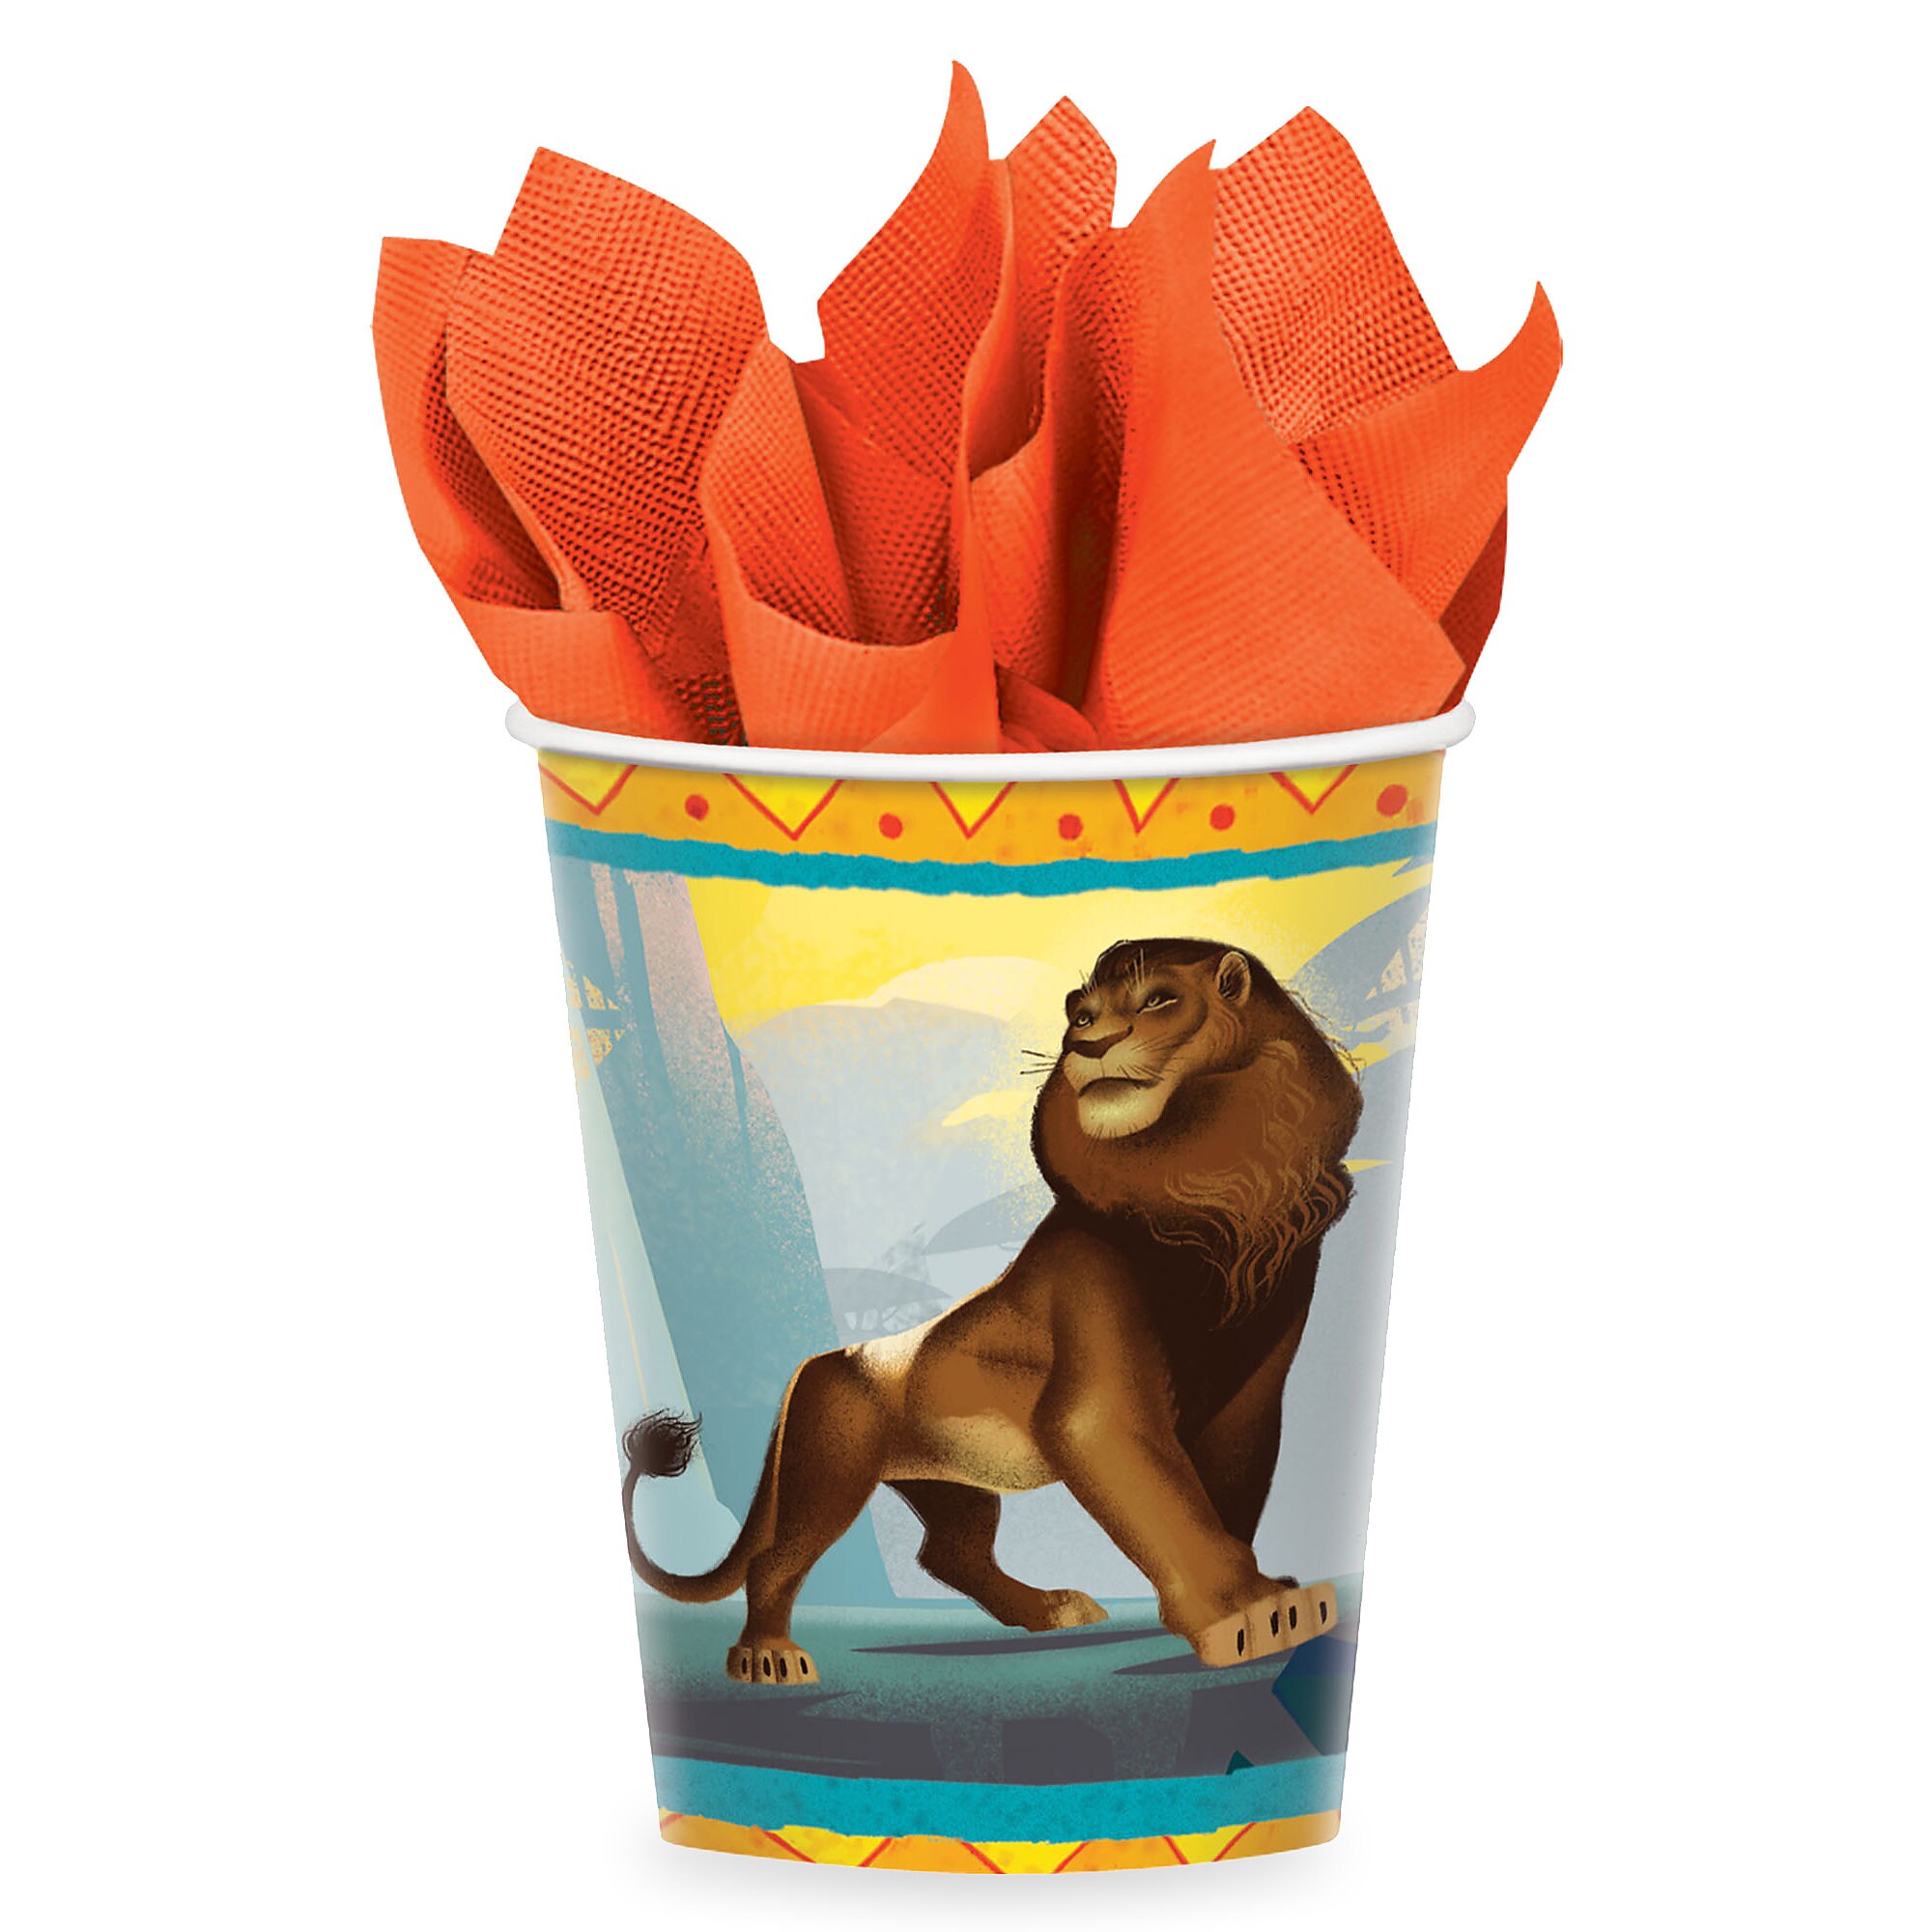 The Lion King 2019 Film Paper Cups